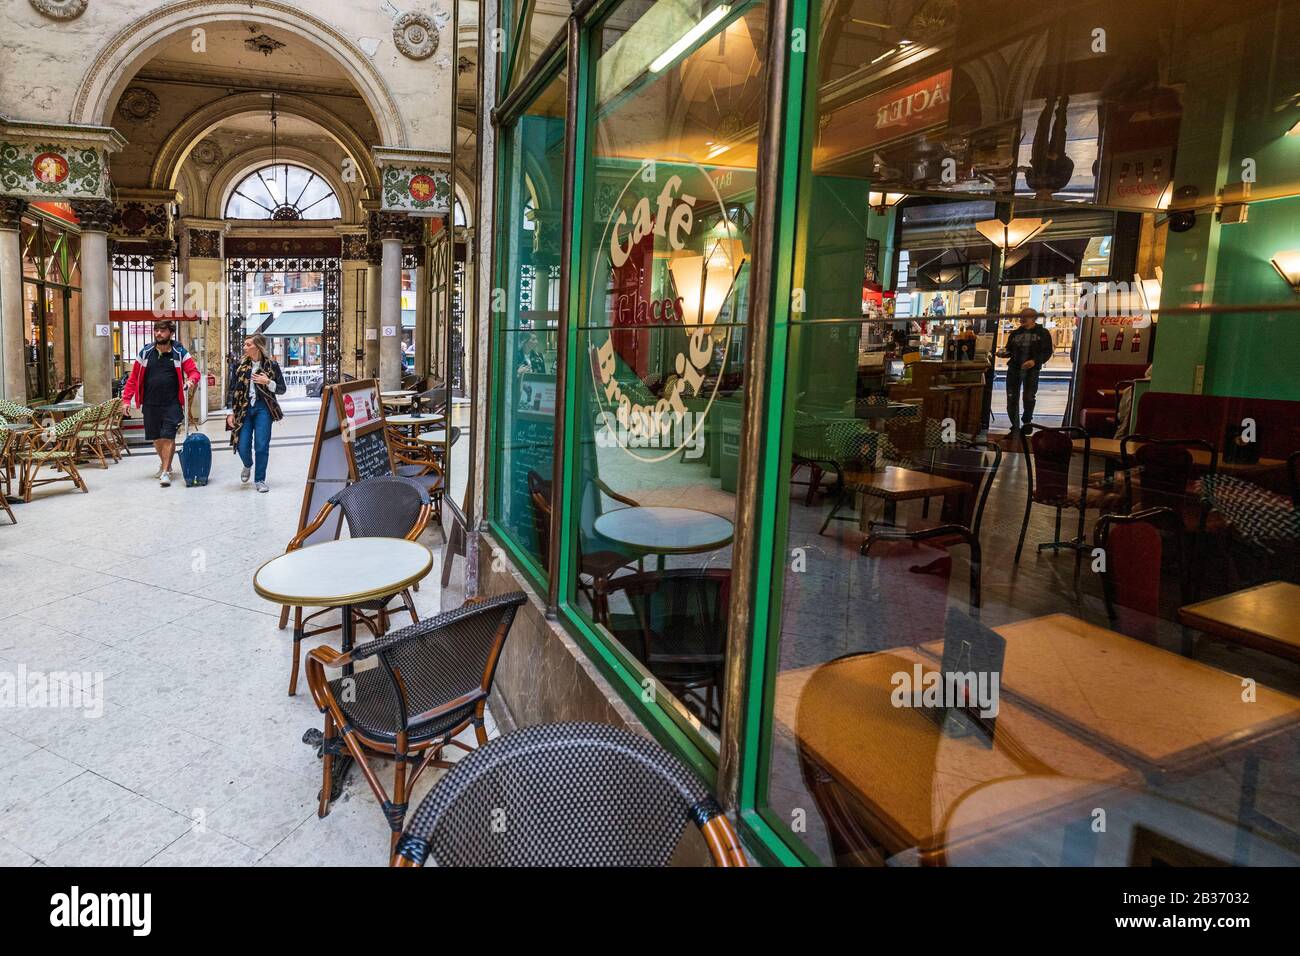 France, Gironde, Bordeaux, zone classified World Heritage by UNESCO, the Galerie Bordelaise, shopping gallery built in 1833, café and brasserie La Maison du Café Stock Photo